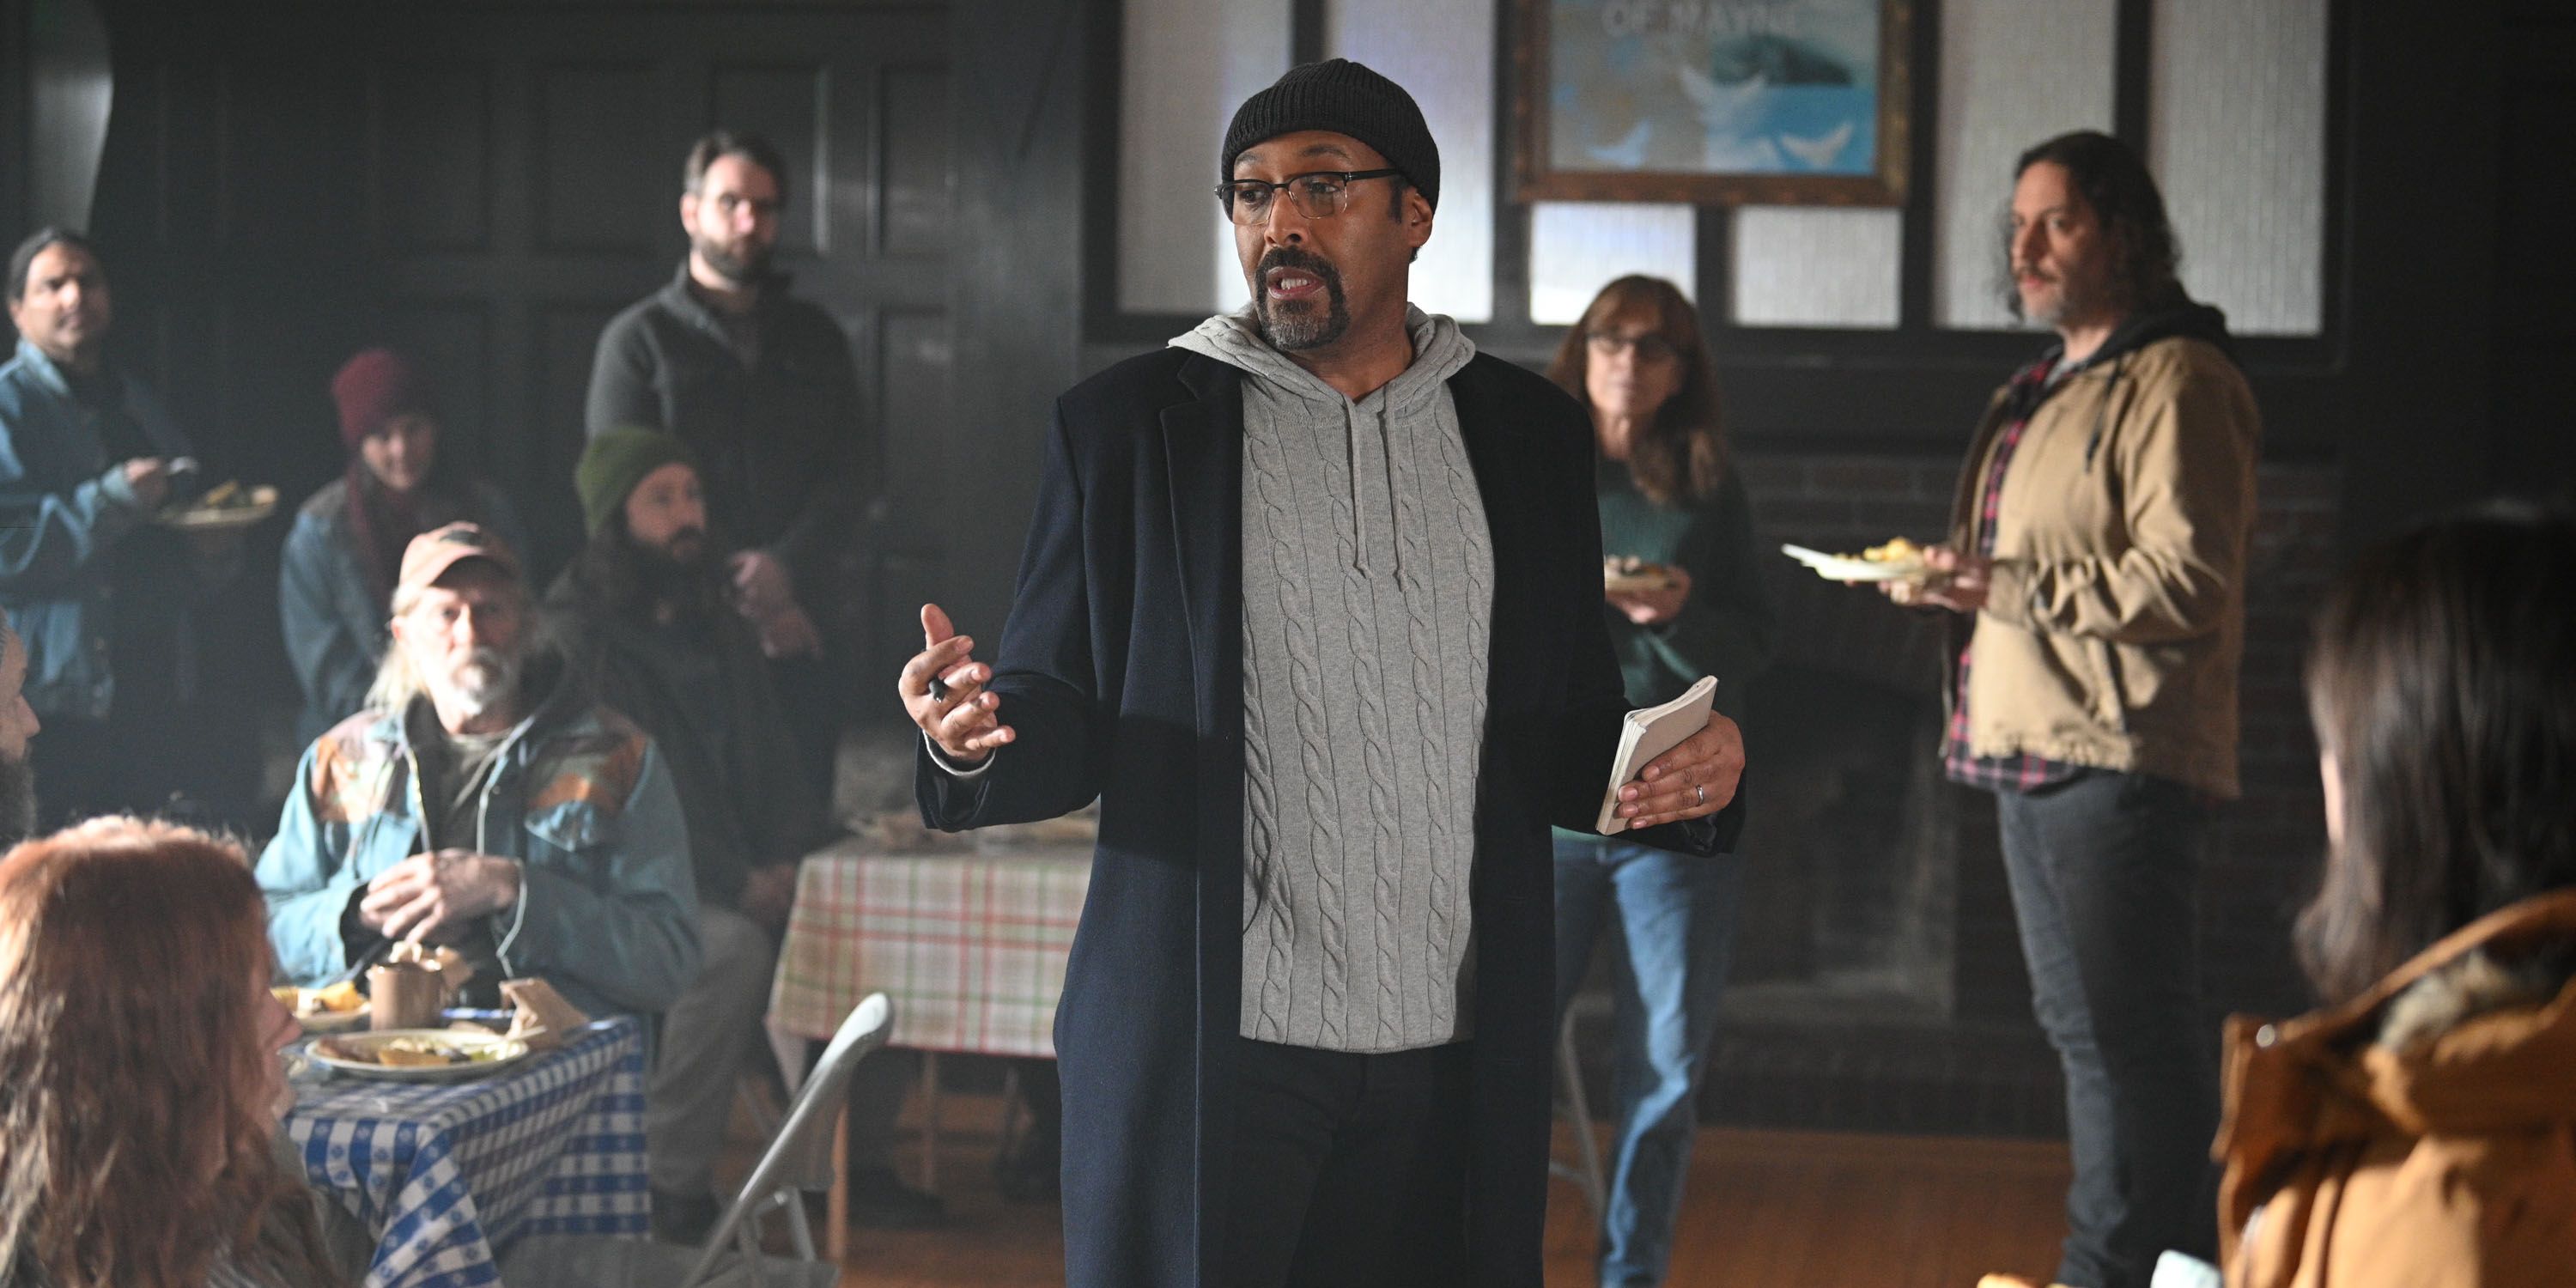 Jesse L. Martin as Alec Mercer talking to a group of people in The Irrational 108.